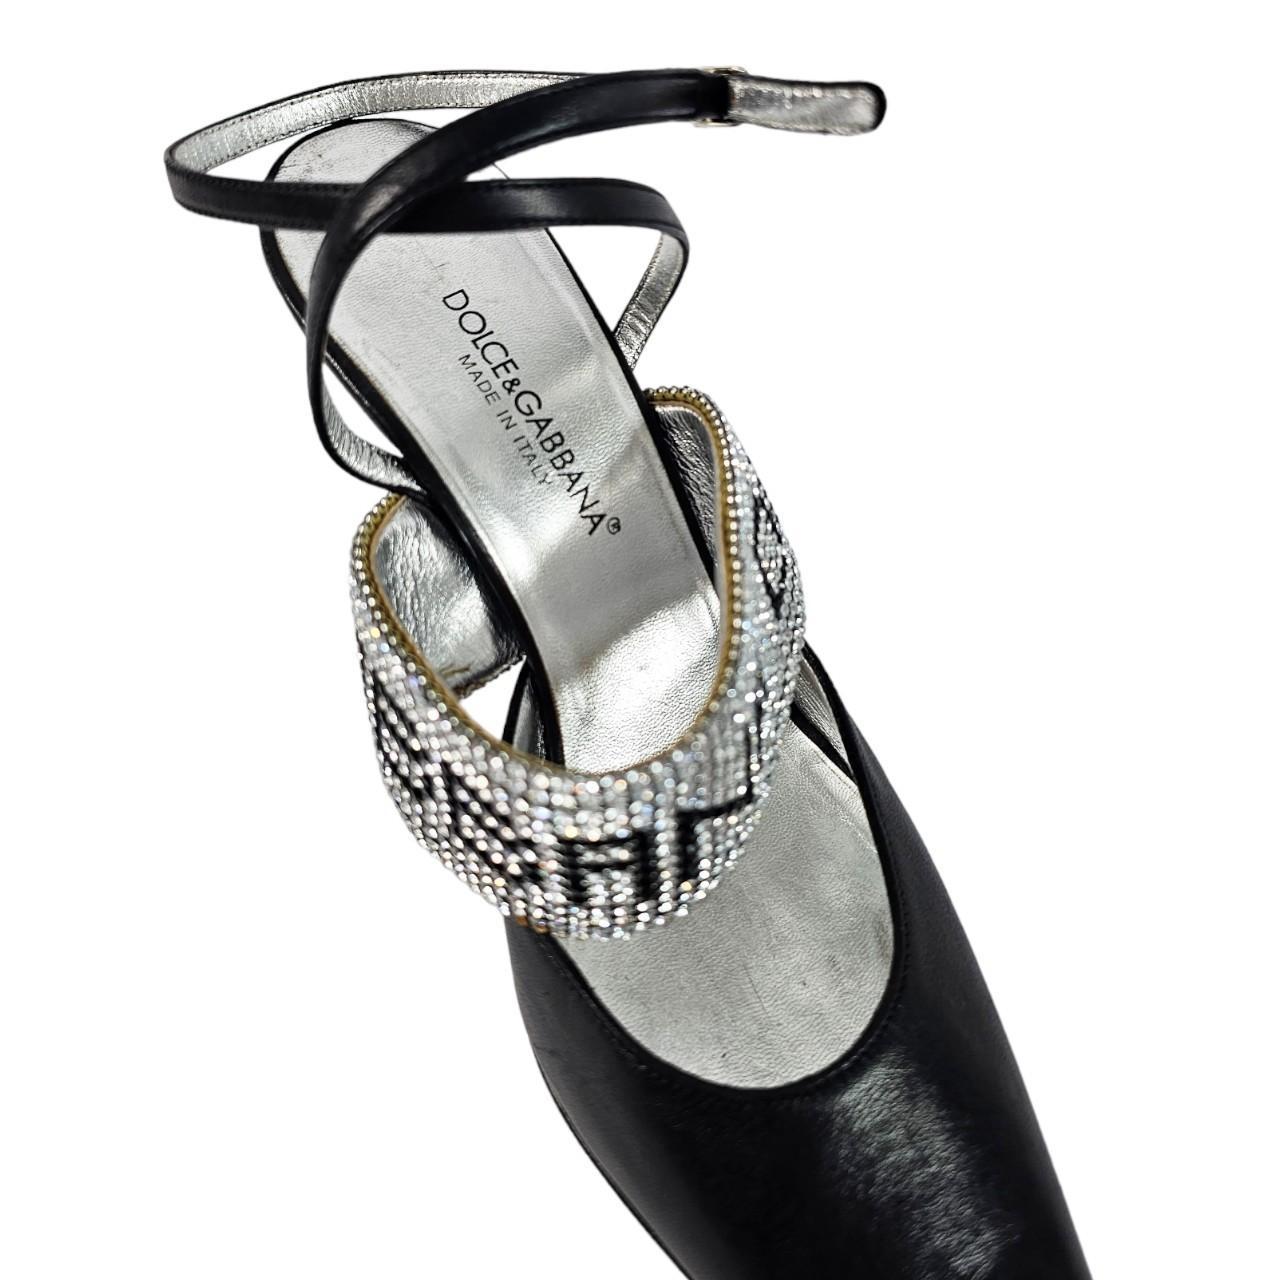 Dolce & Gabbana Women's Black and Silver Courts - 5